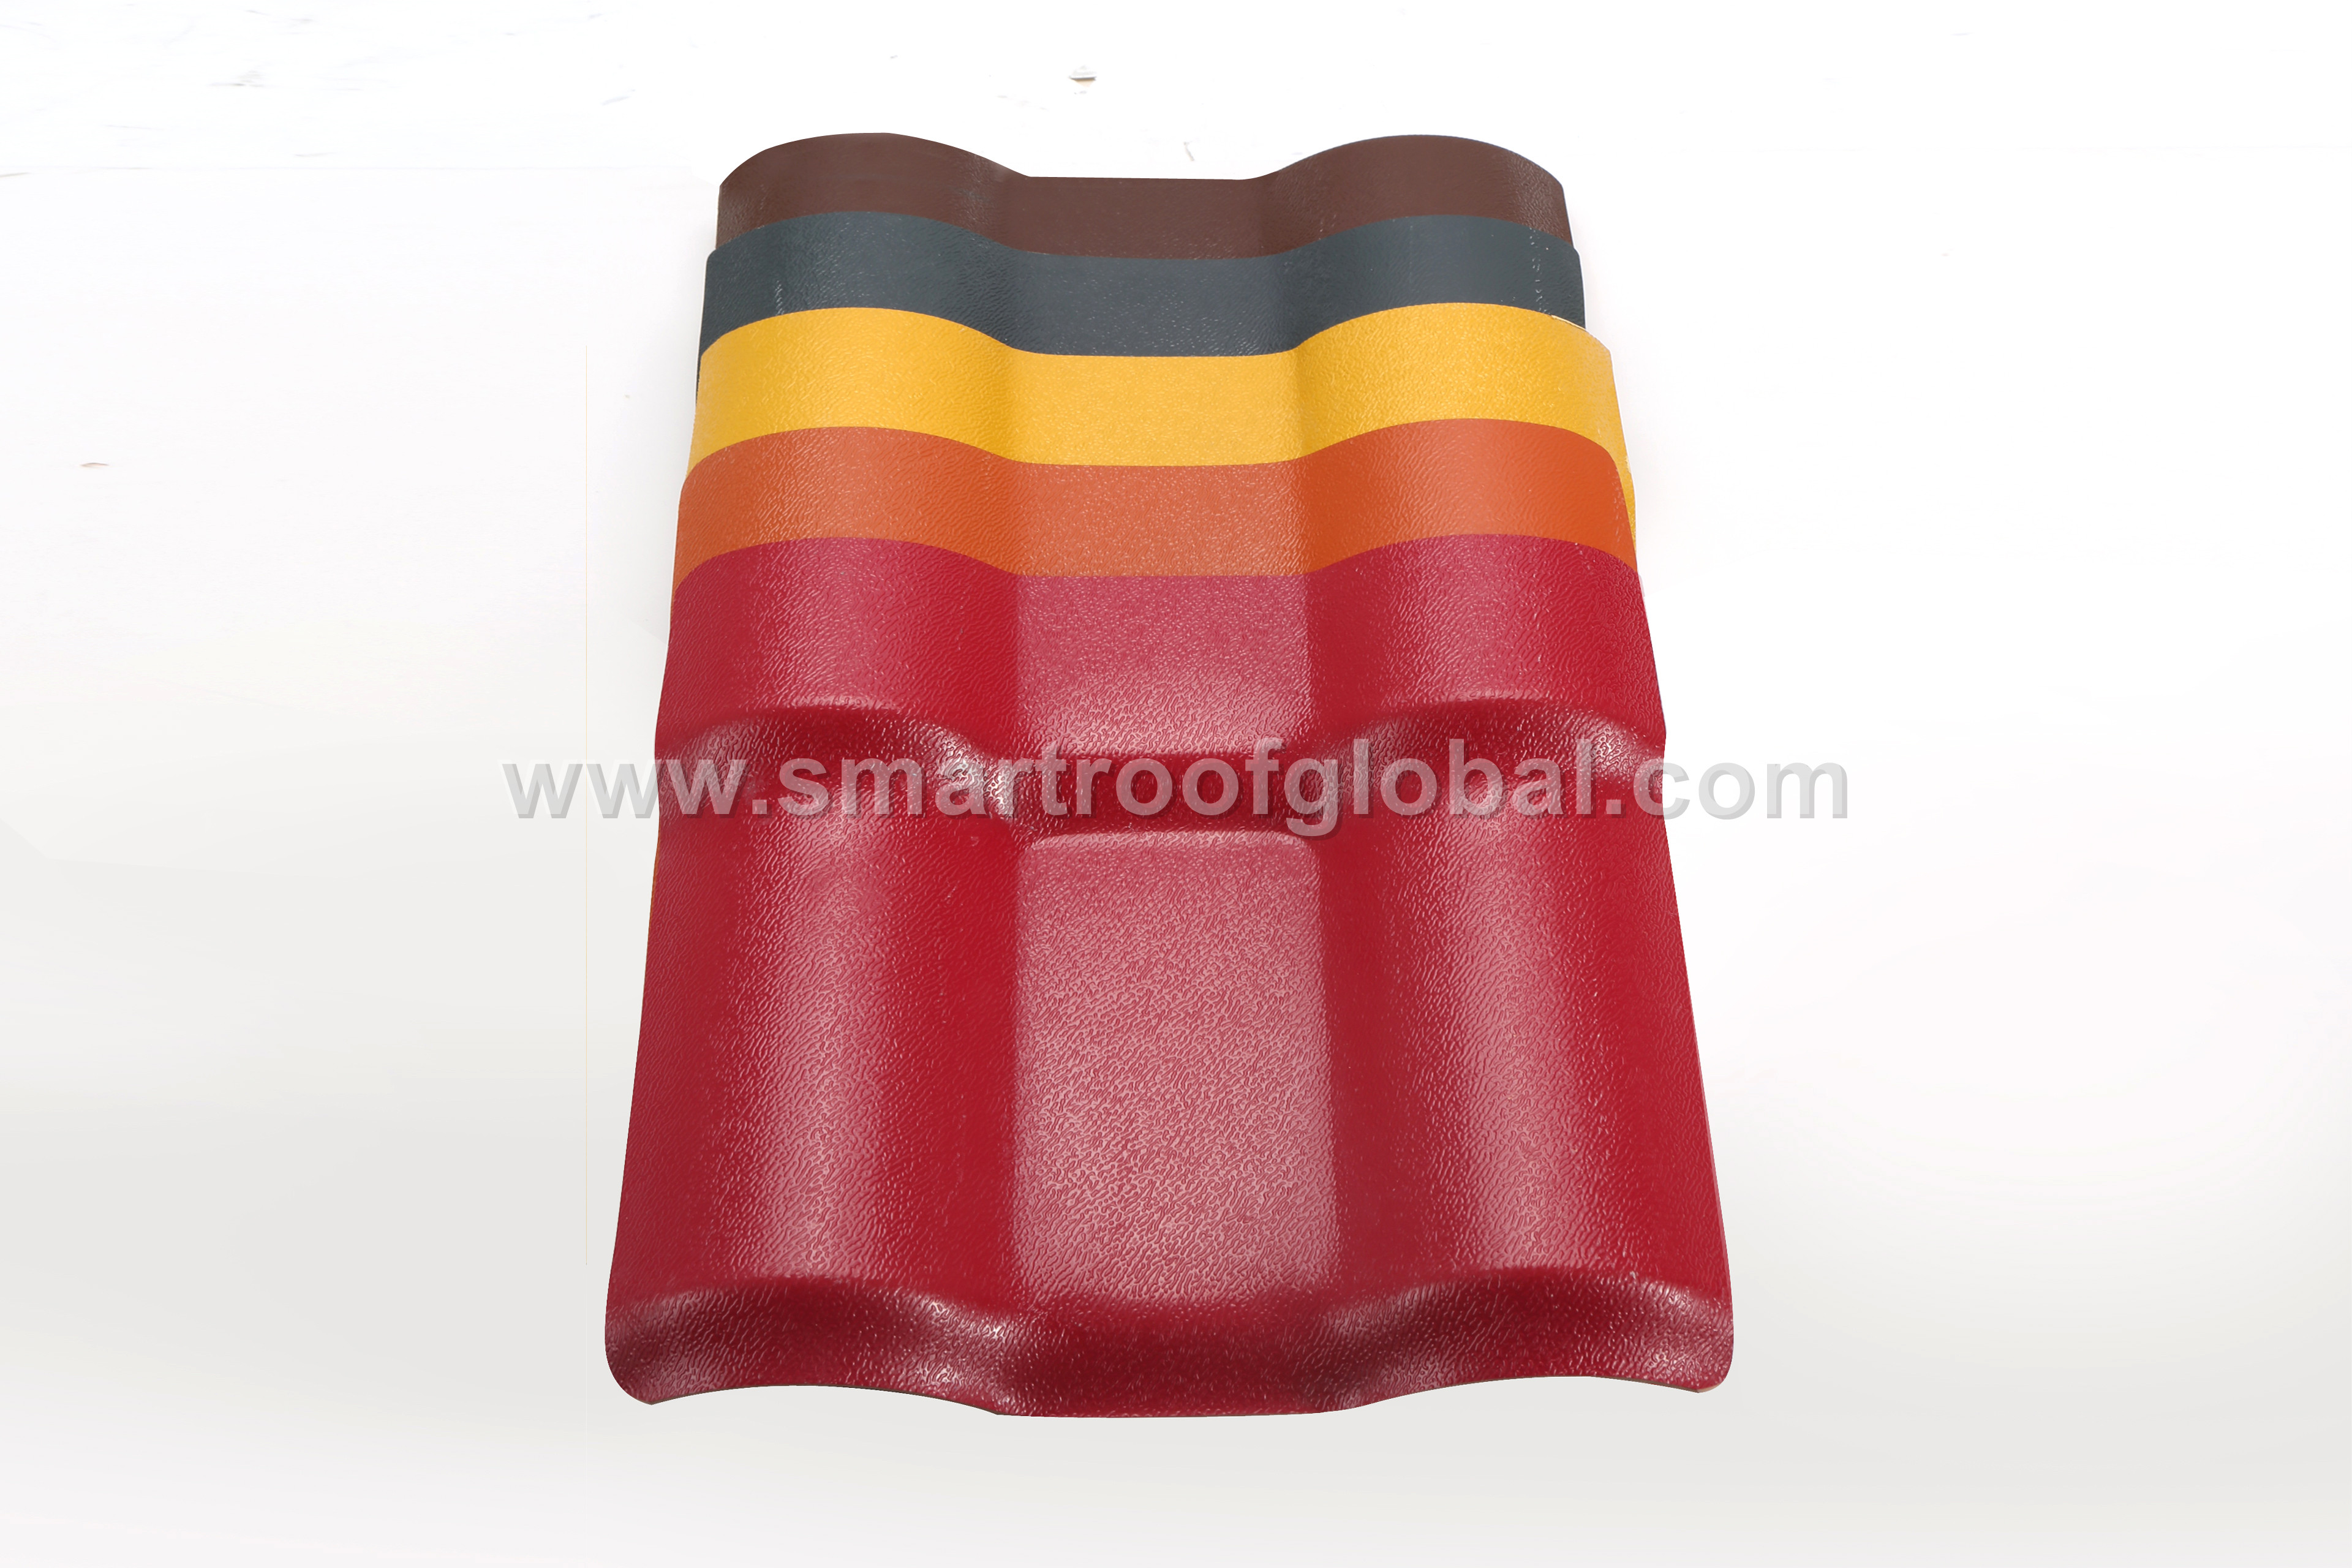 PriceList for Corrugated Steel Roofing - Resin Roofing Sheet – Smartroof